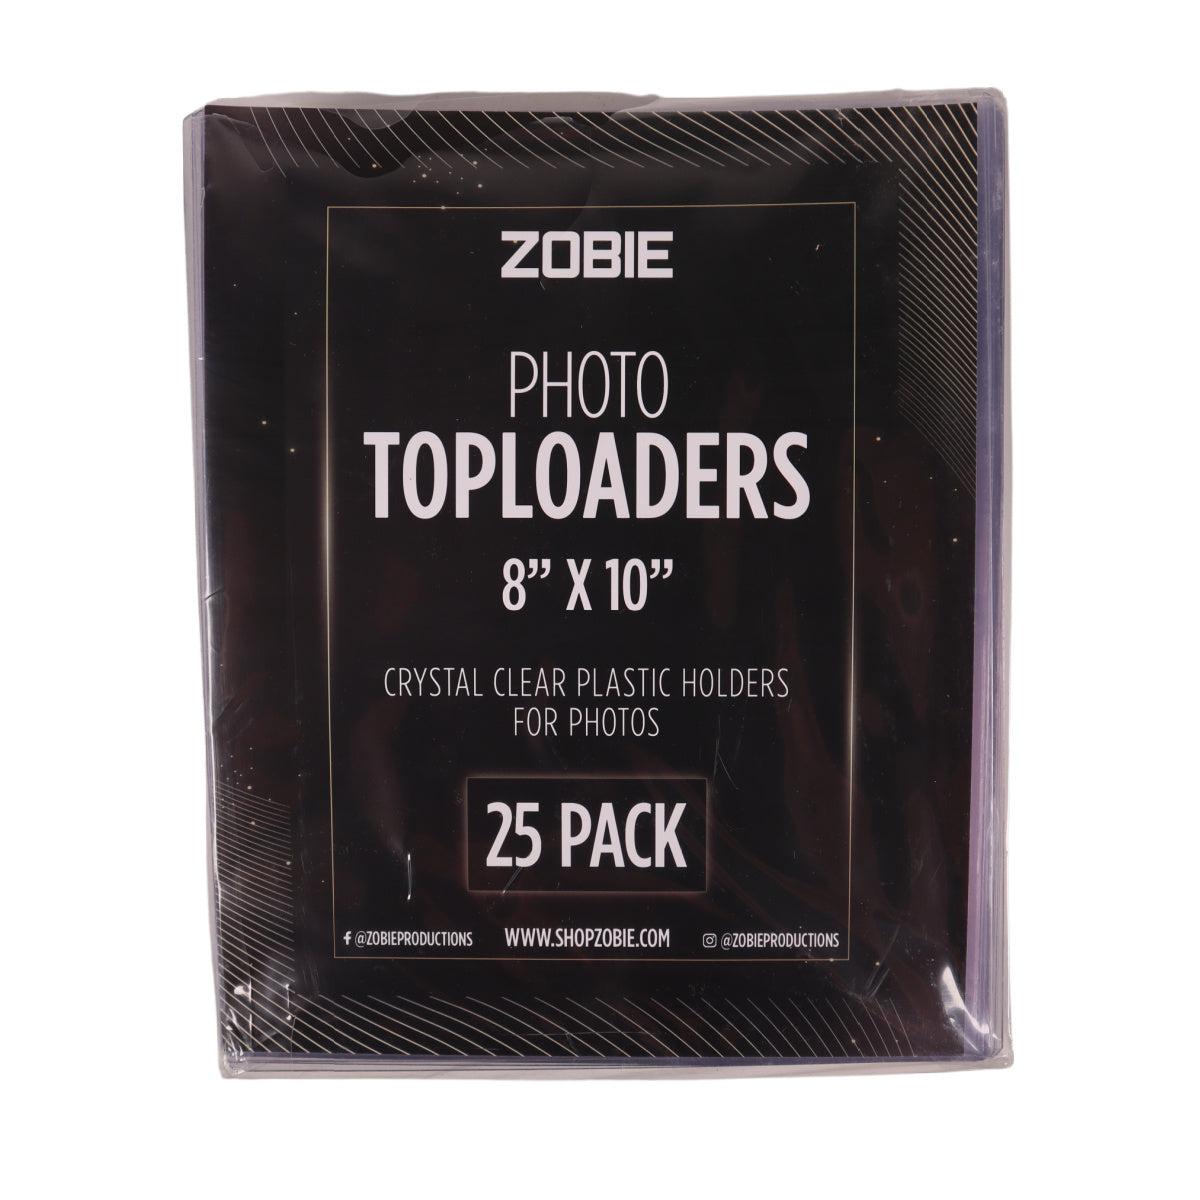 Zobie 8x10" Photo Toploaders - Crystal Clear Plastic Holders for Photos